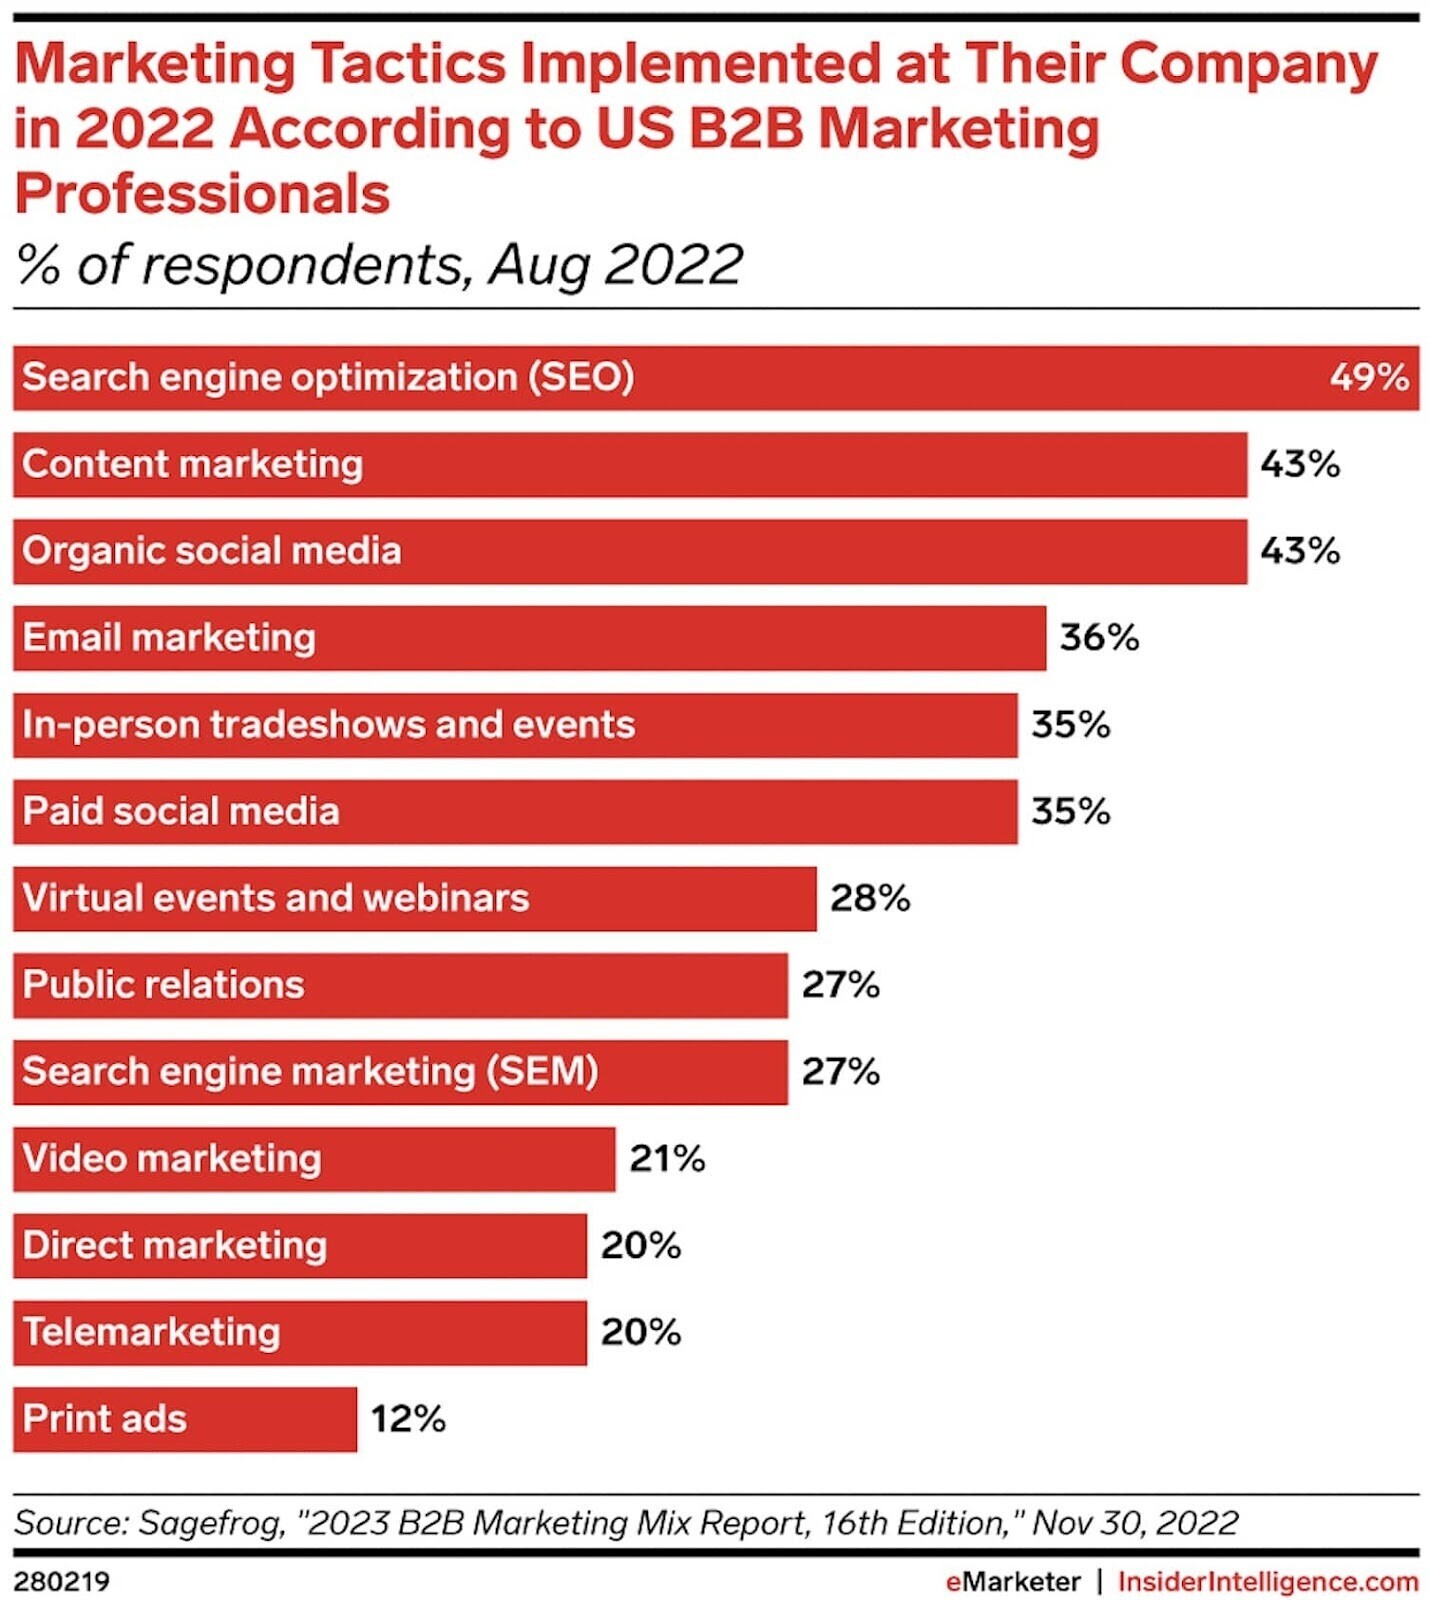 Marketing tactics implemented at their company in 2022 according to US B2B marketing professionals